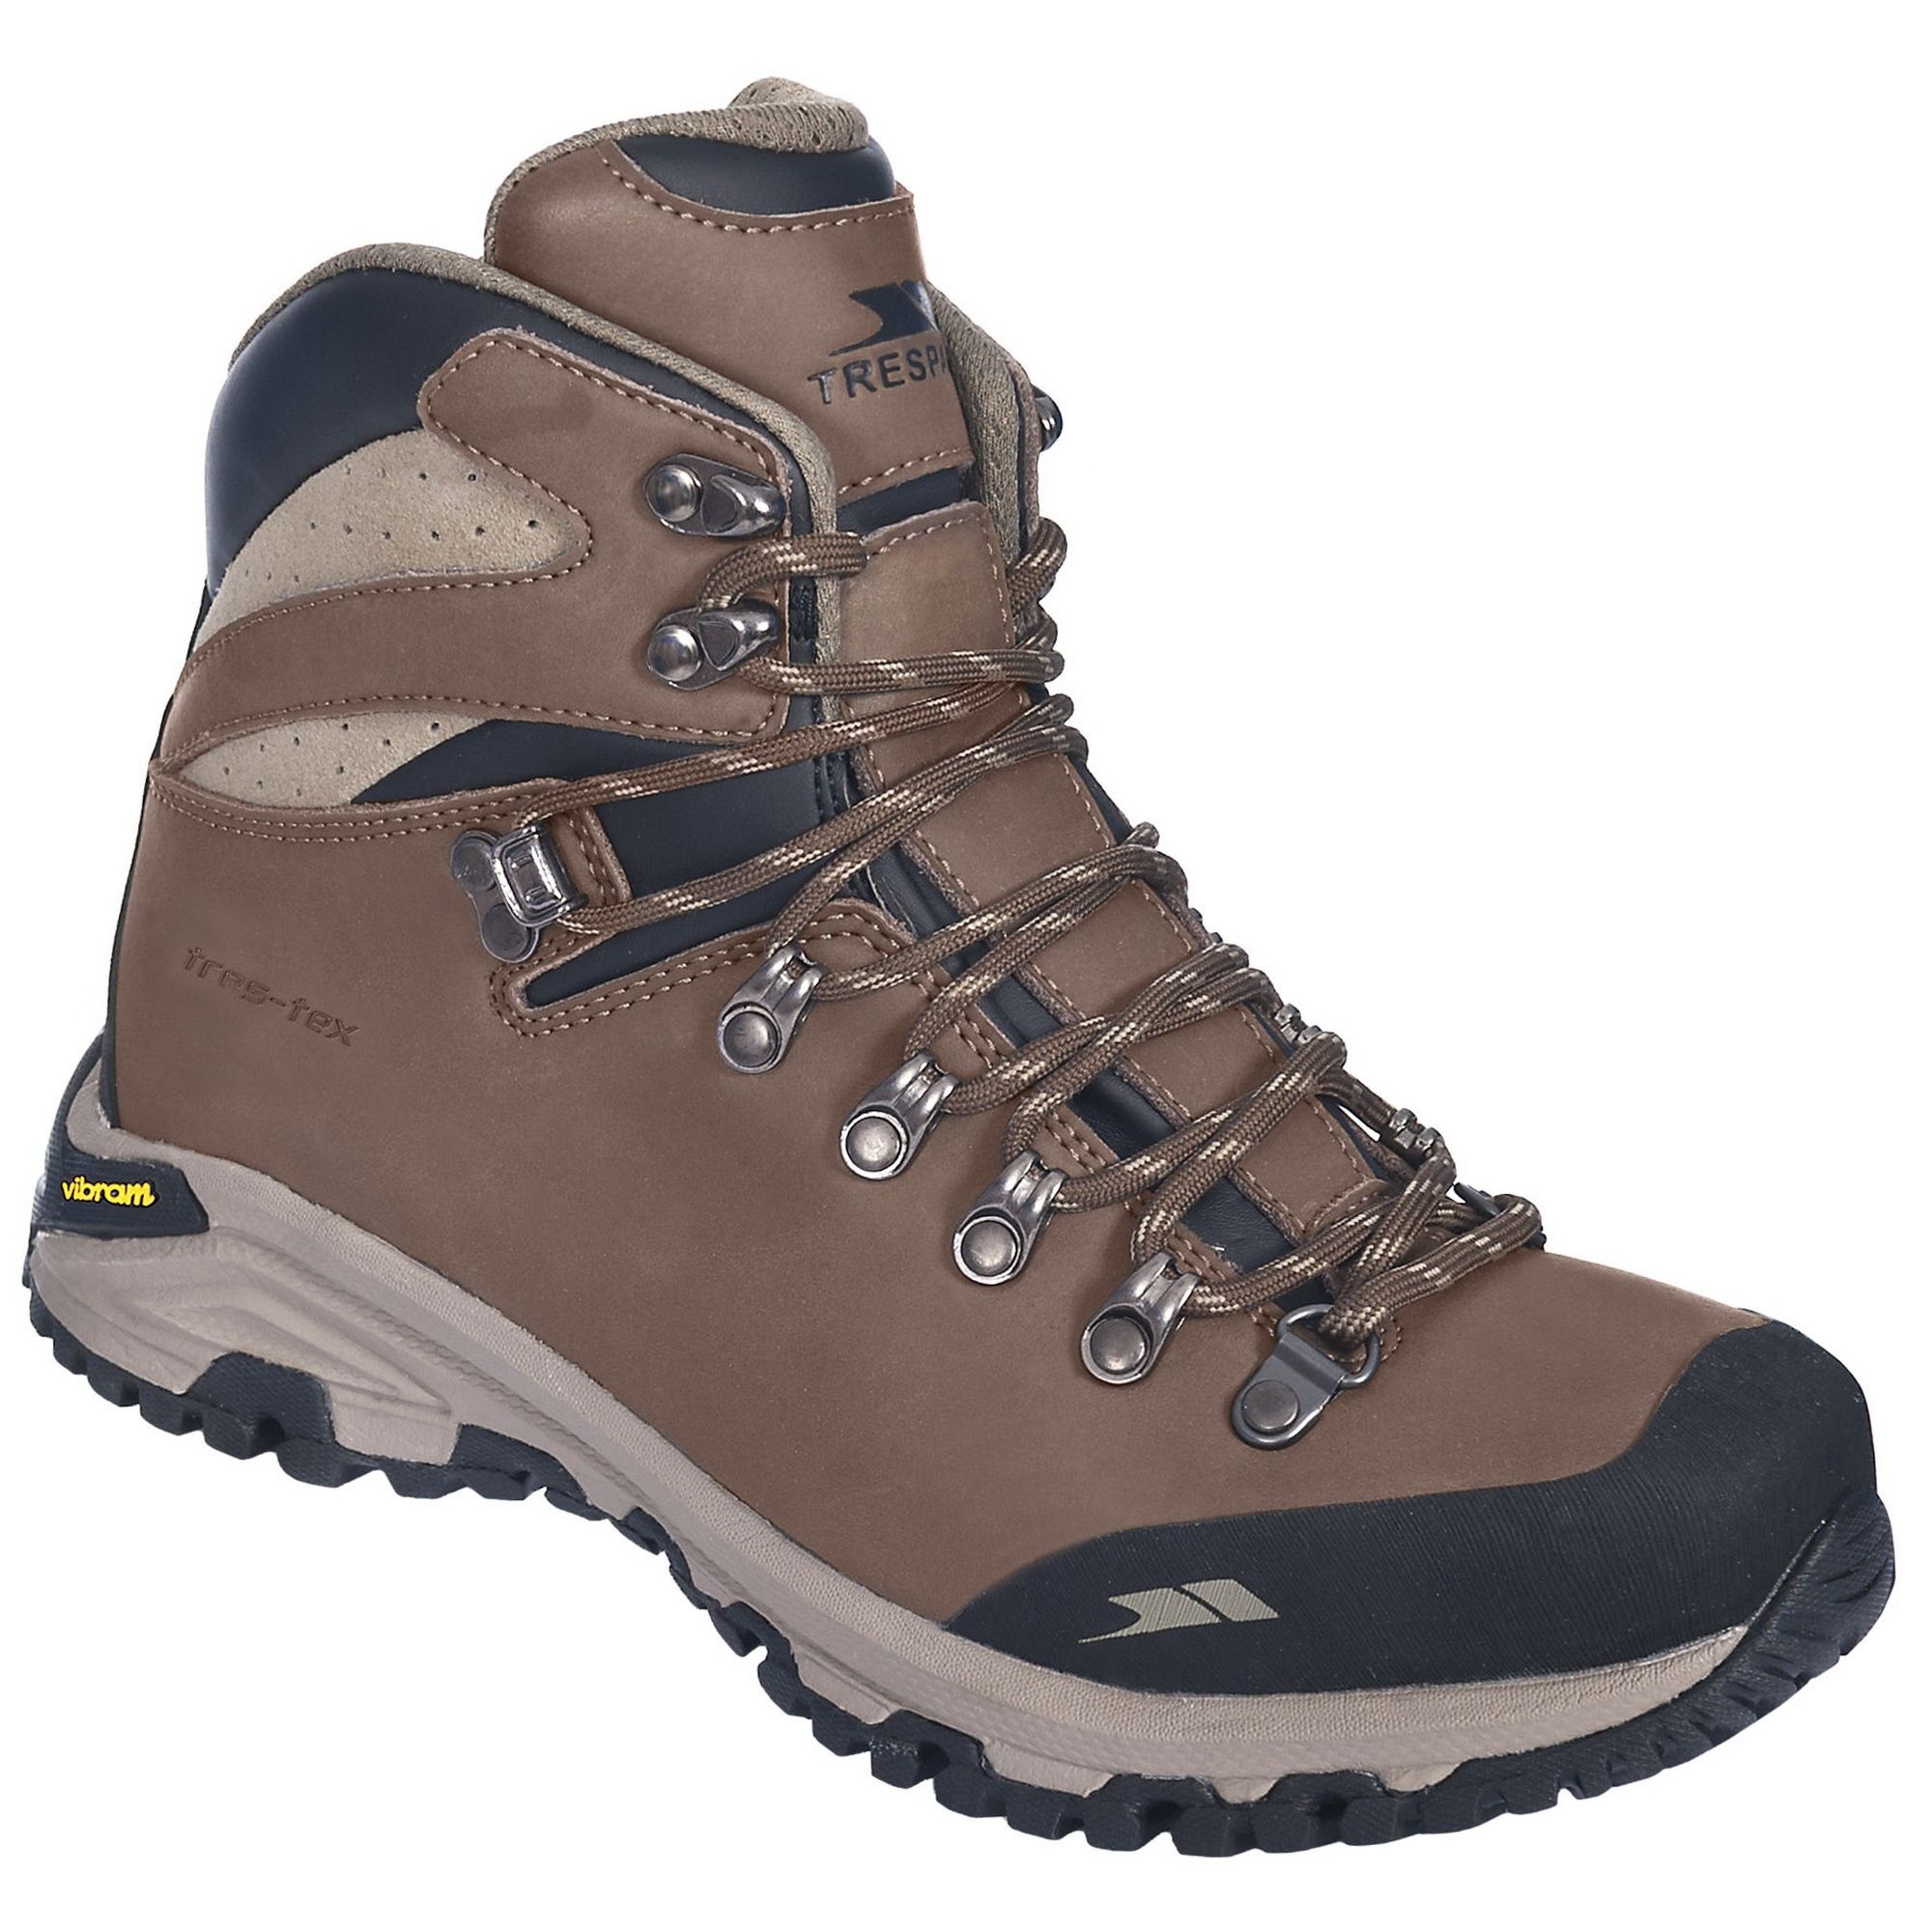 Womens leather walking boots. Waterproof, breathable build. Embossed logo. Robust grip sole. Reinforced toe protector. Ankle support. Upper: 100% Leather, Lining: 100% Textile, Midsole: 100% Phylon, Sole: 100% Vibram rubber.